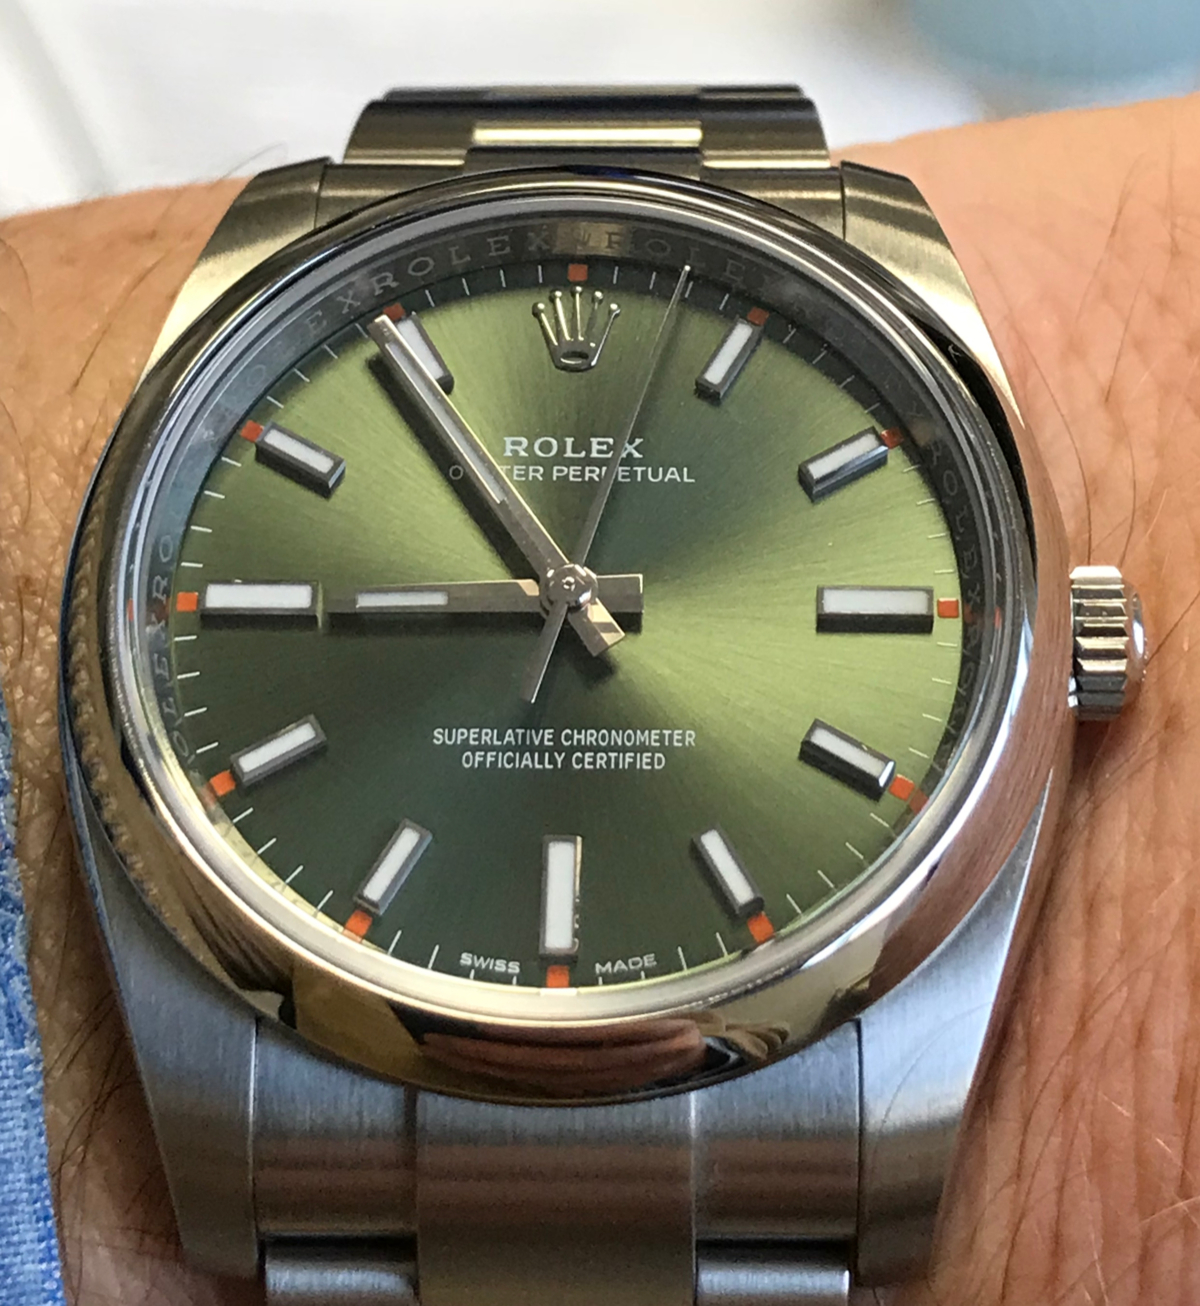 Owner Review: Rolex Oyster Perpetual 114200 - FIFTH WRIST